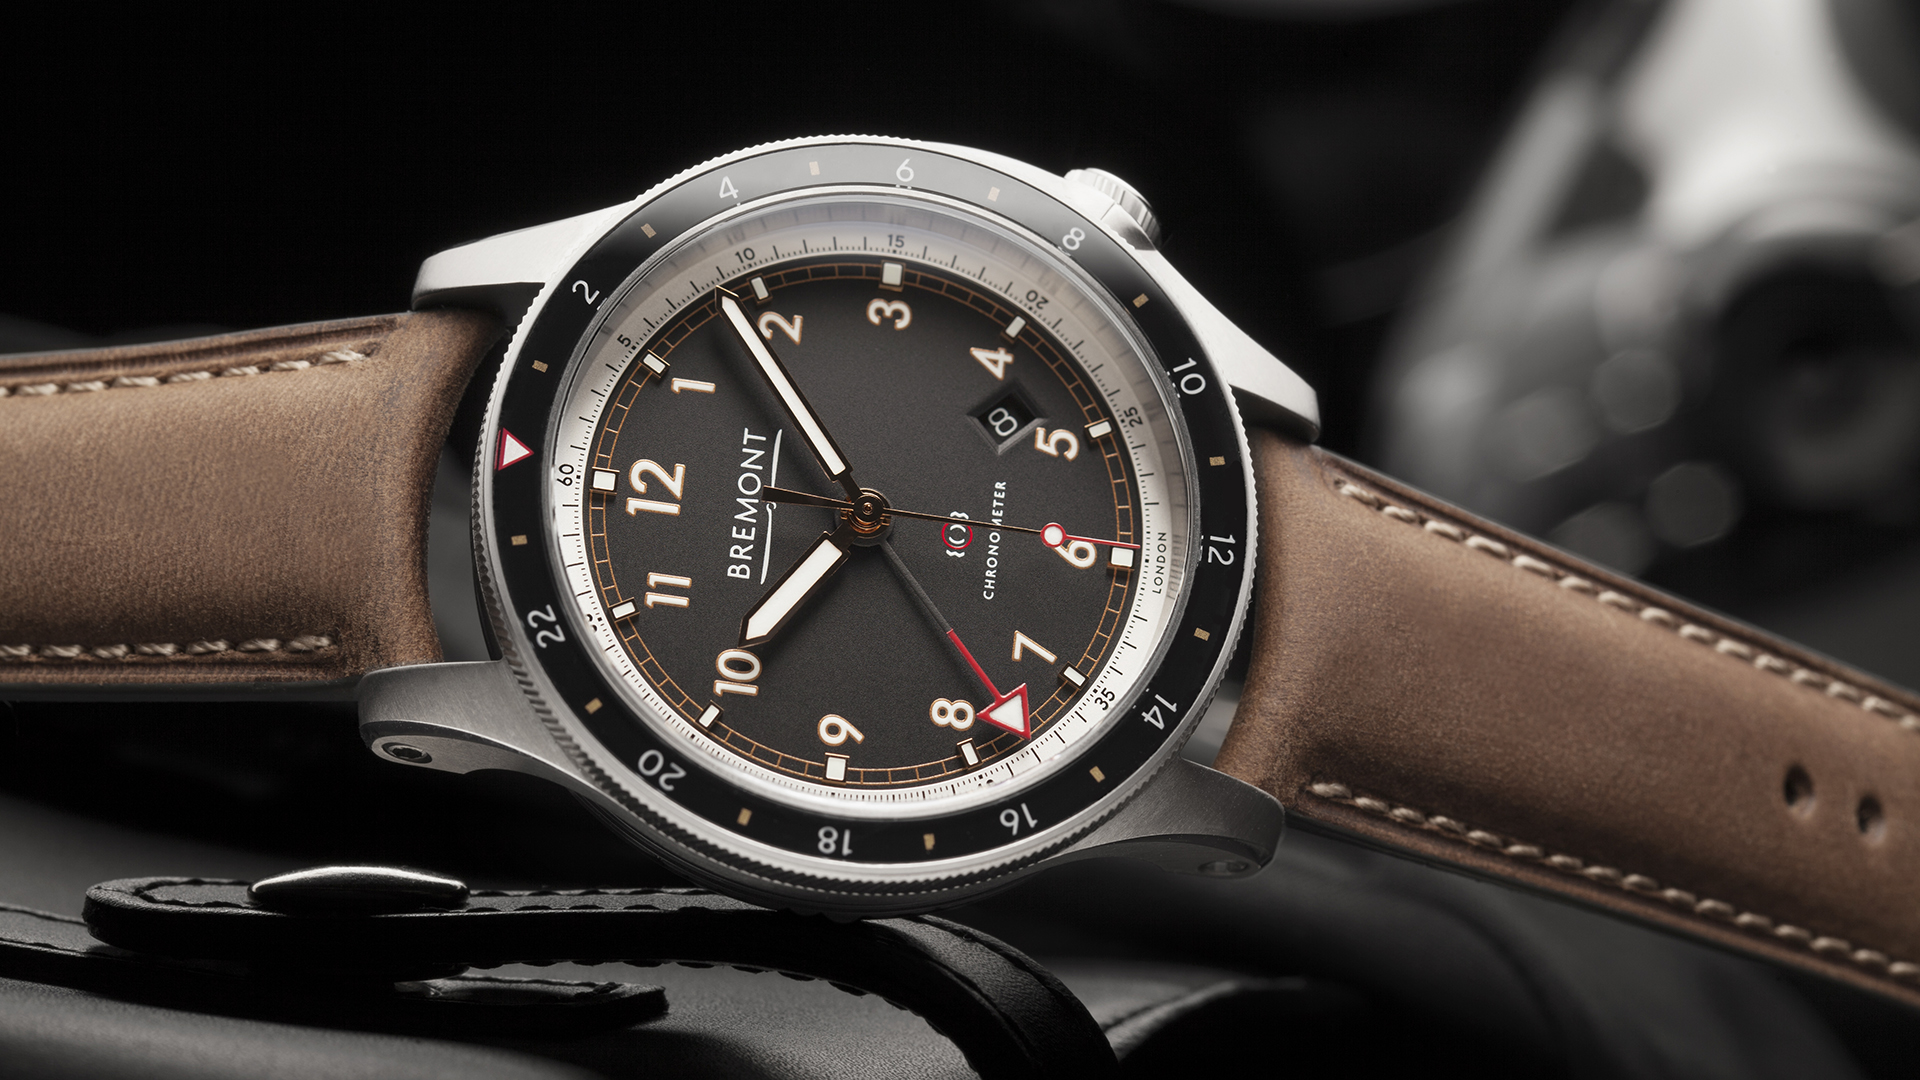 Bremont Announces ionBird GMT Watch In Partnership With Rolls-Royce